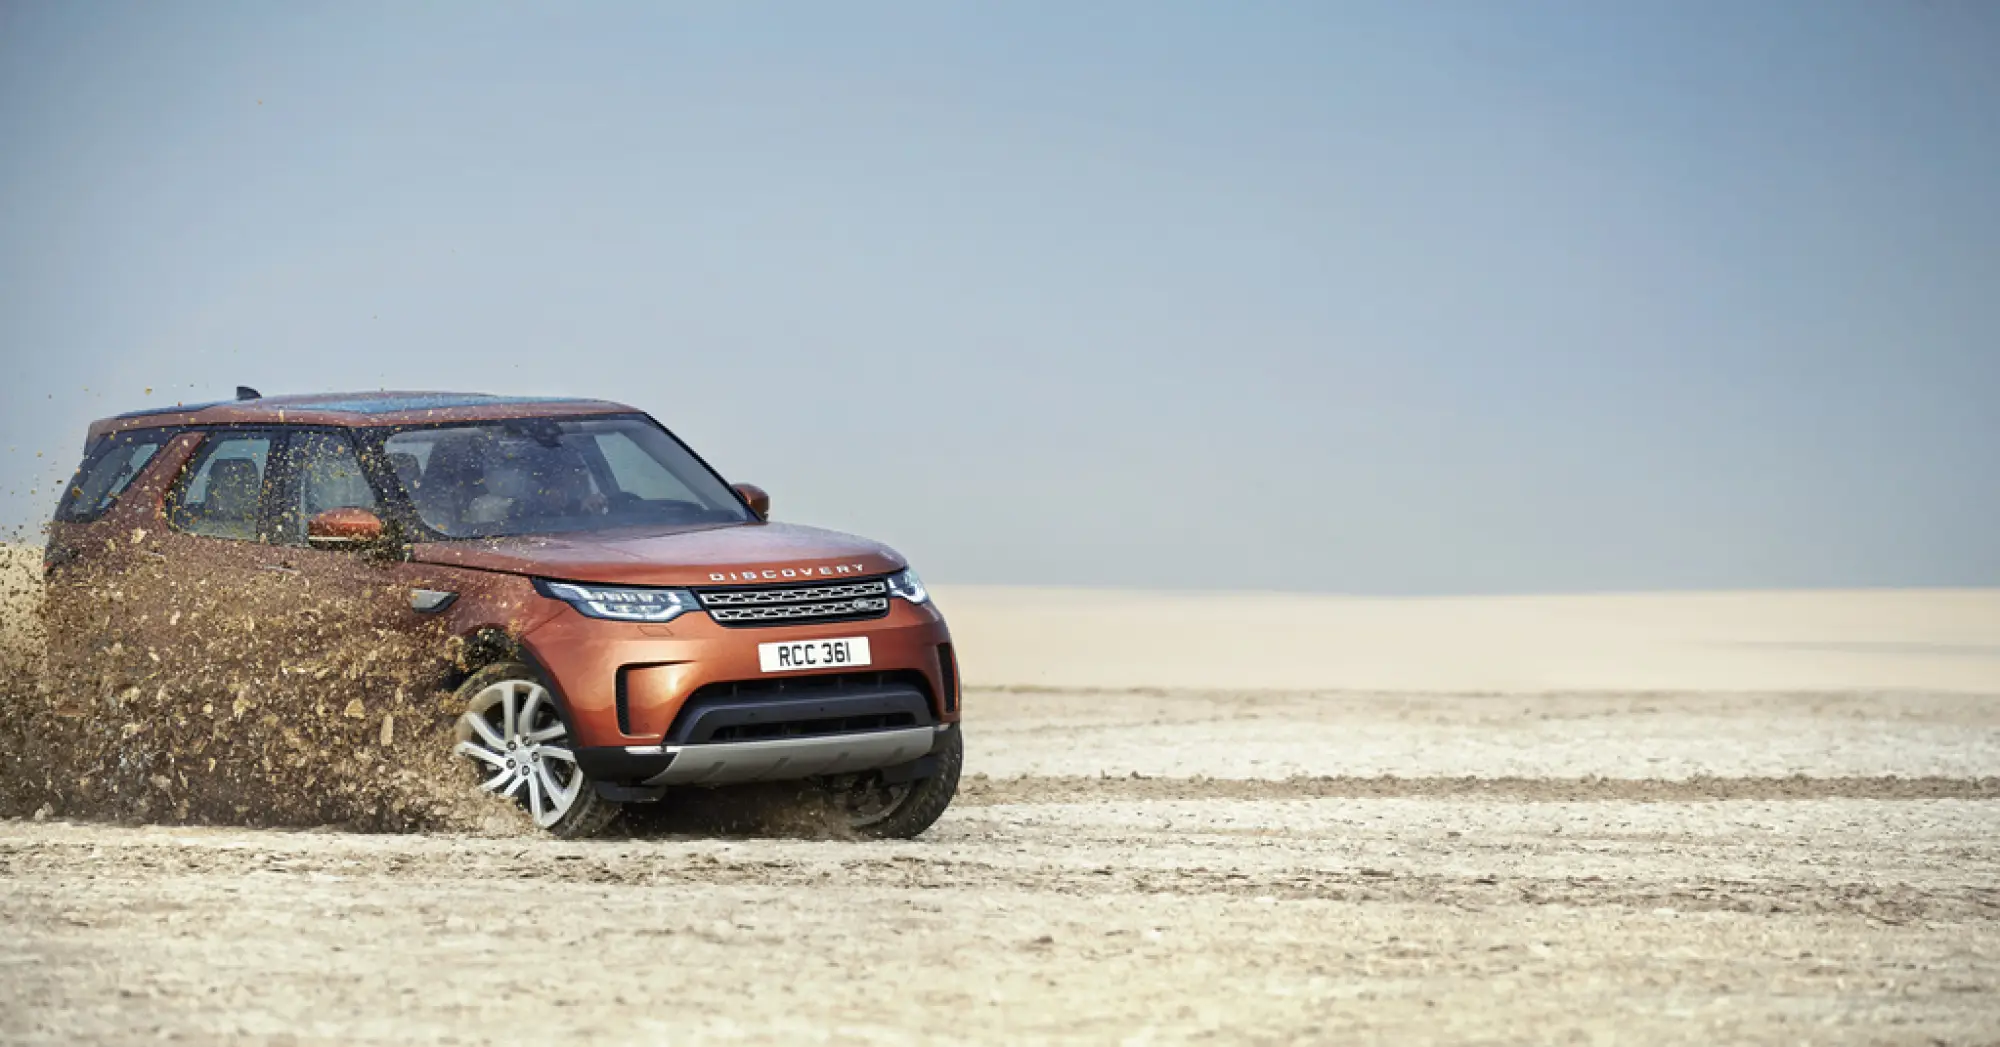 Foto stampa nuova Land Rover Discovery MY 2017 28 settembre 2016 - 2